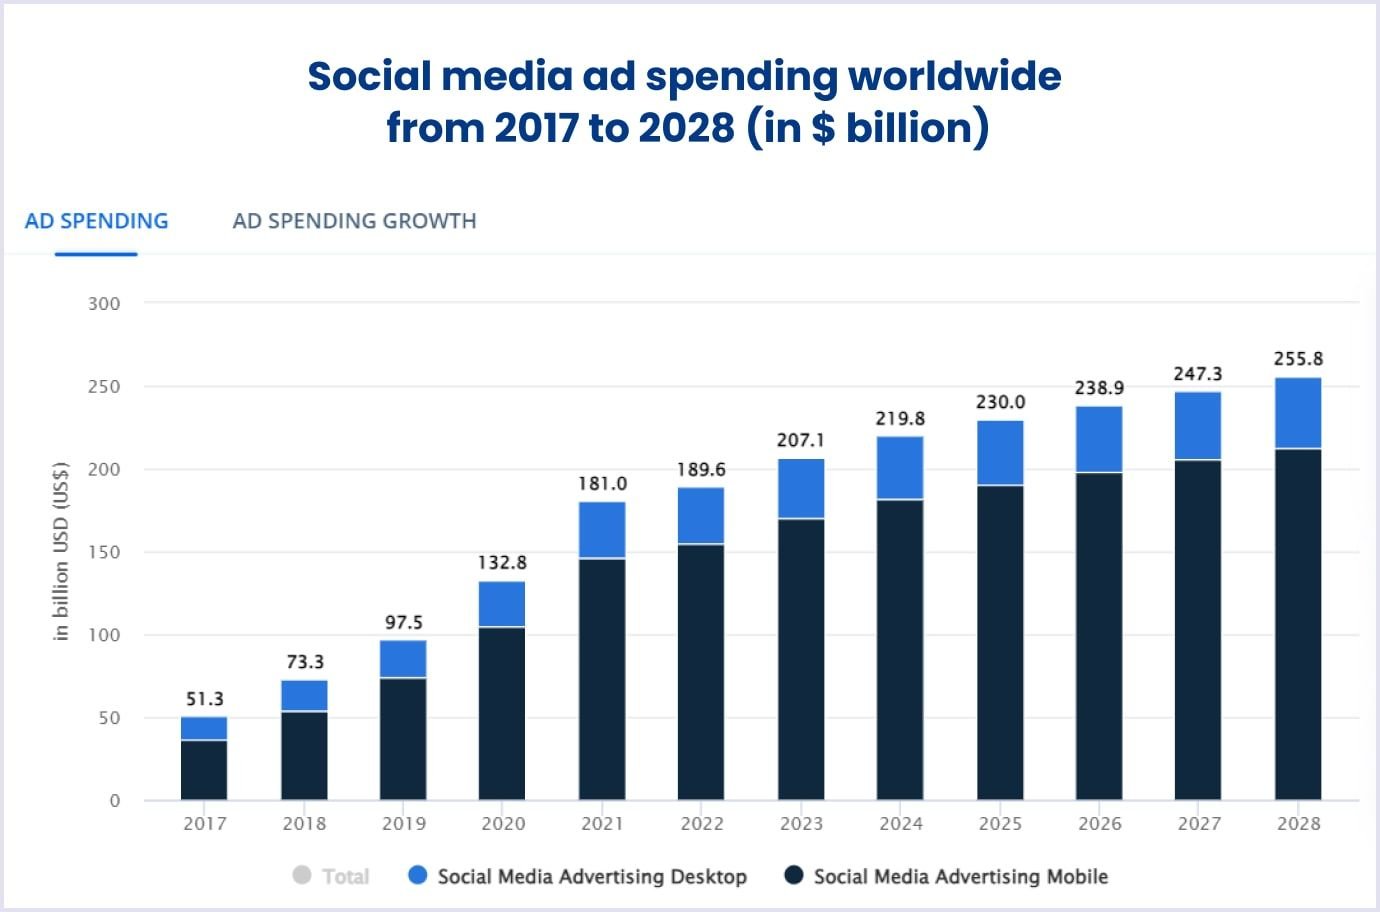 Social media advertising spending worldwide from 2017 to 2028 by Statista